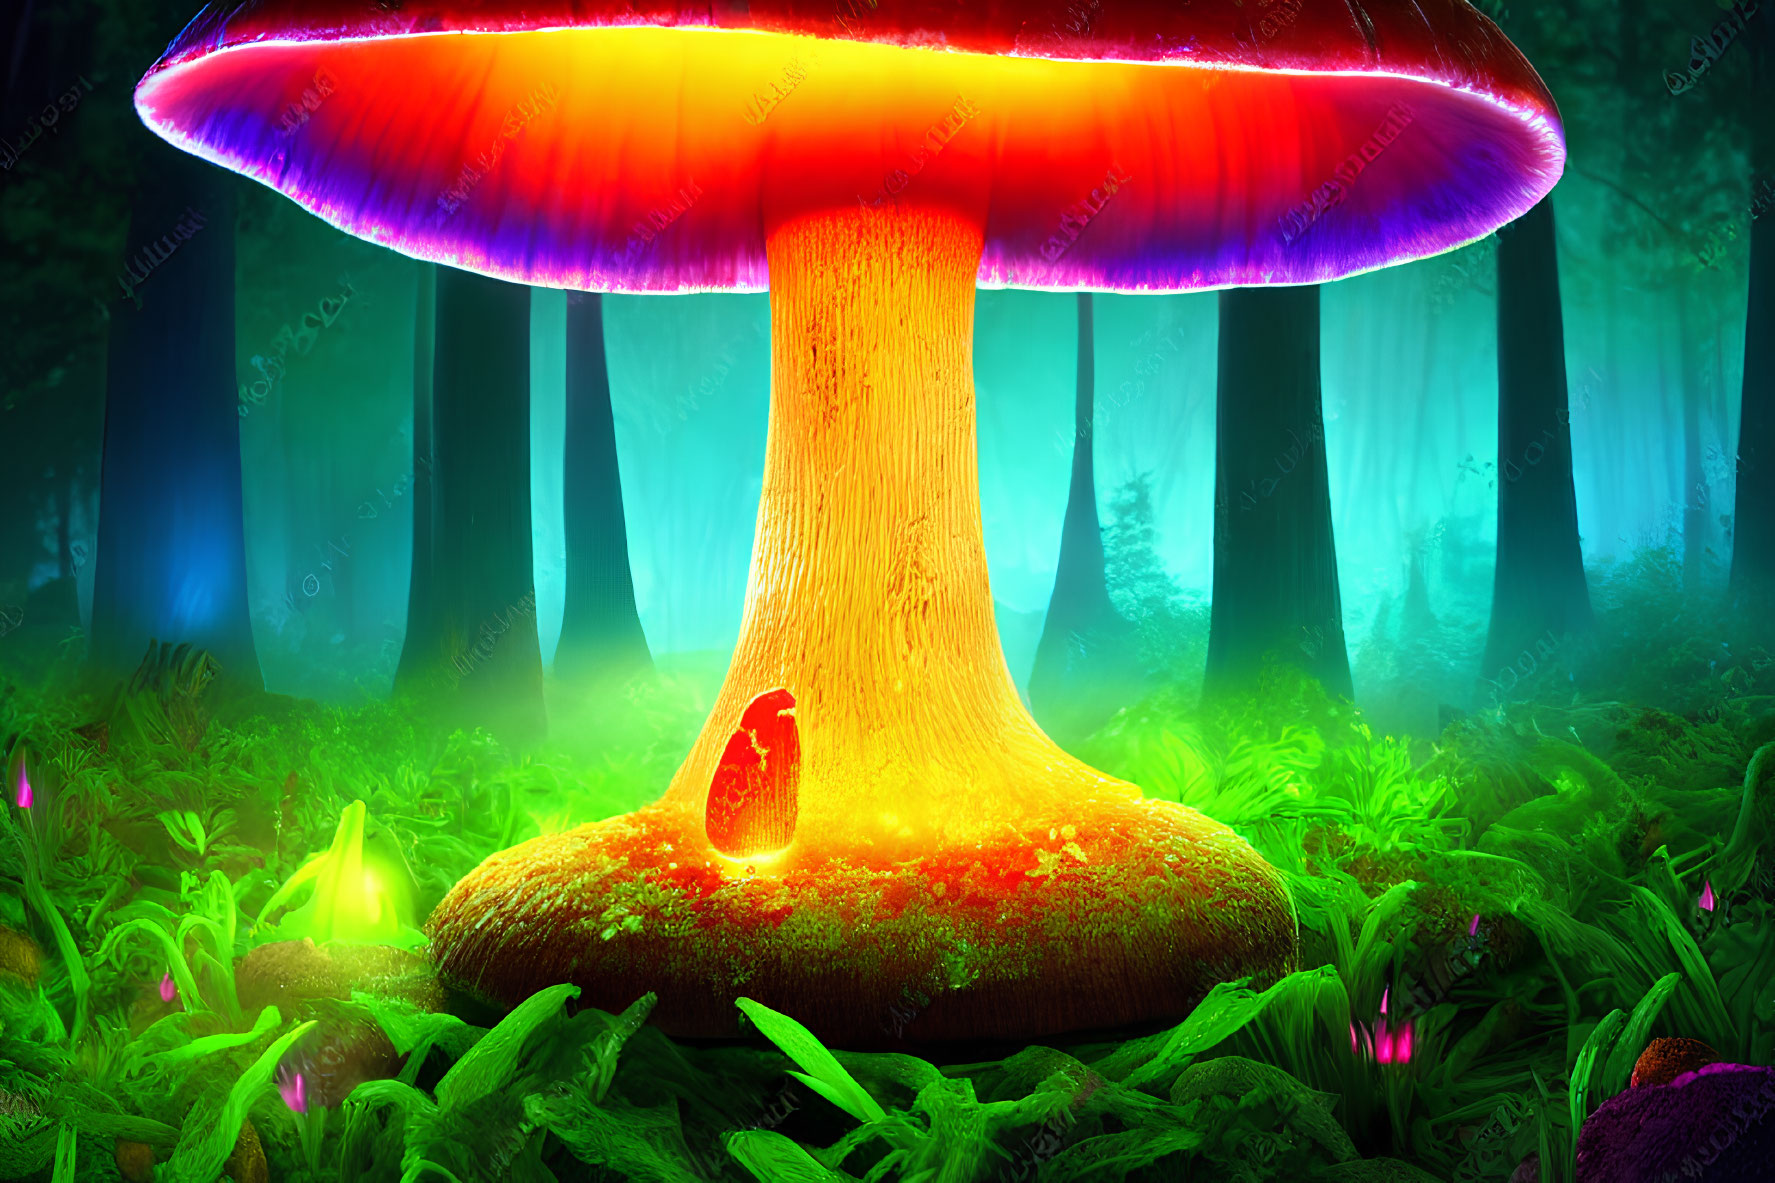 Colorful oversized glowing mushroom in fantastical forest with magical creature